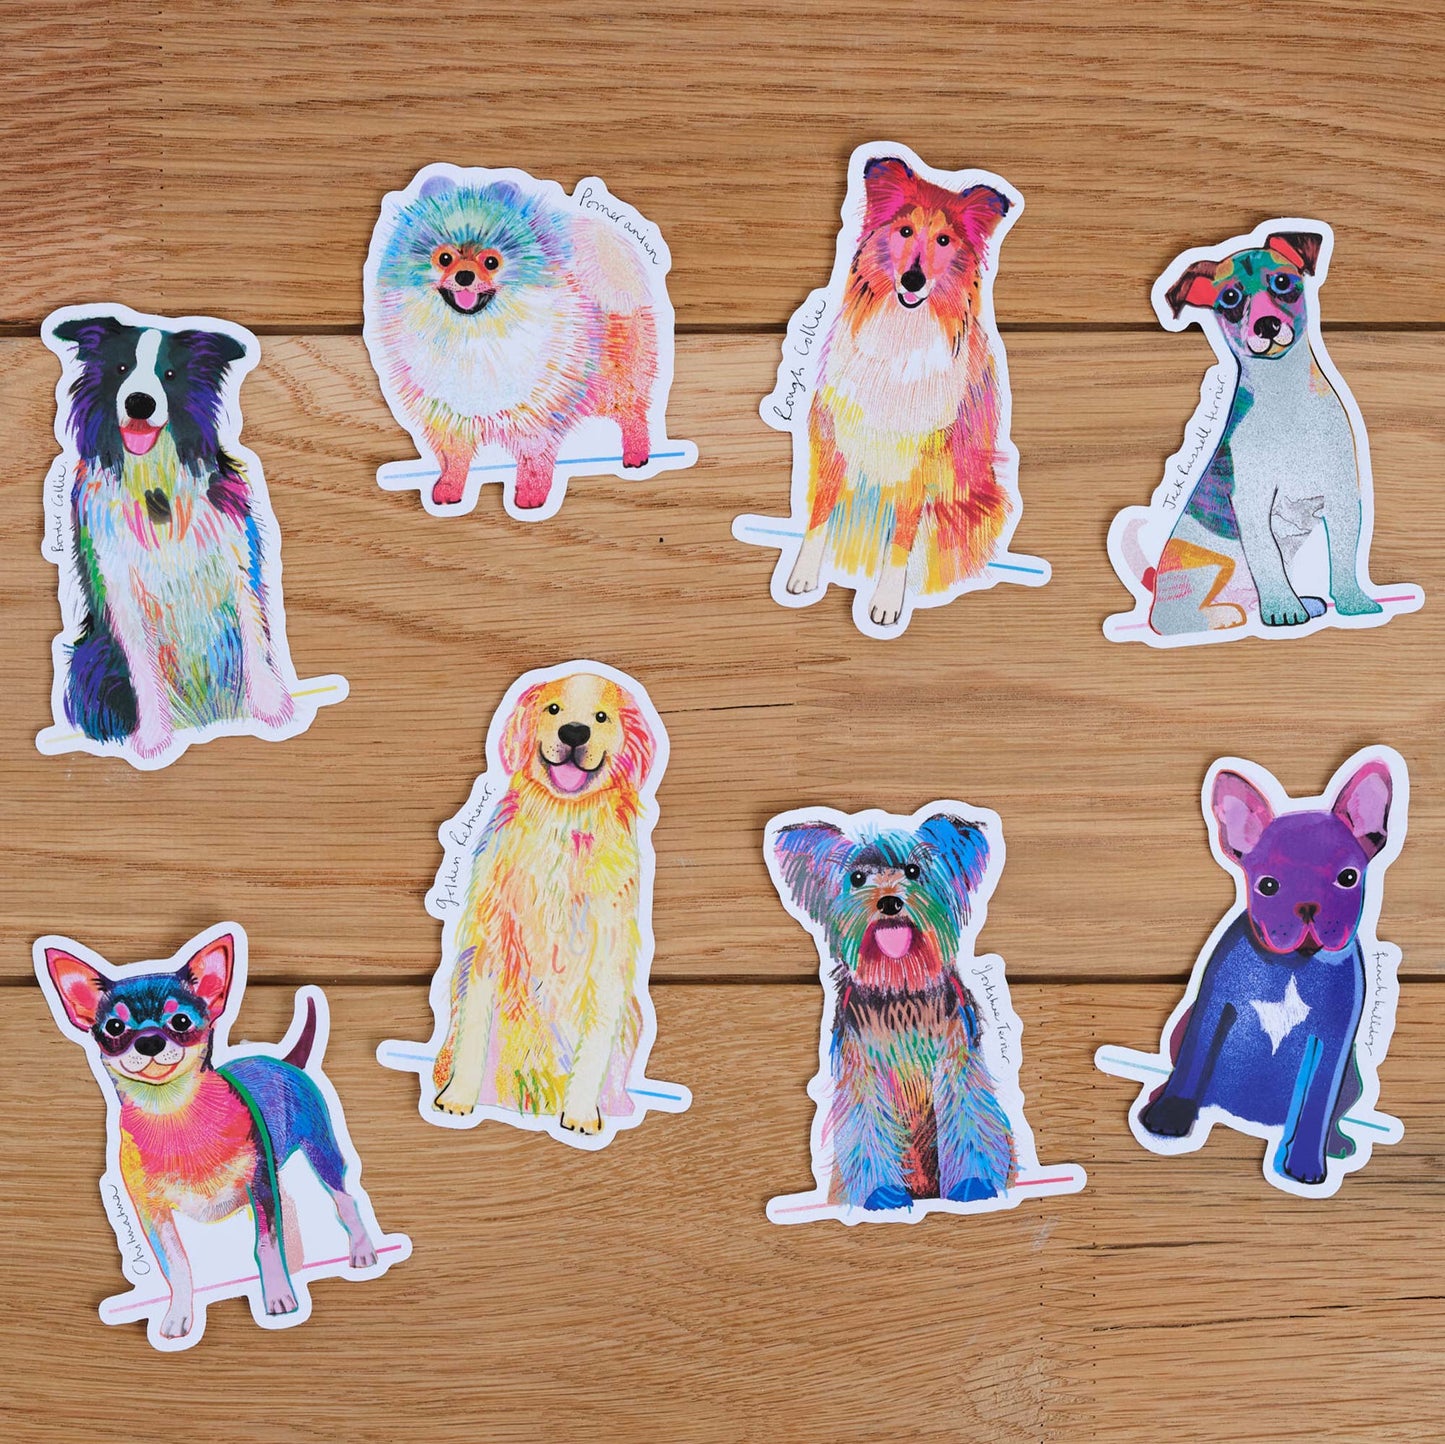 Jack Russell Terrier Dog Sticker, I DREW DOGS, Dog Stickers, Dog gifts